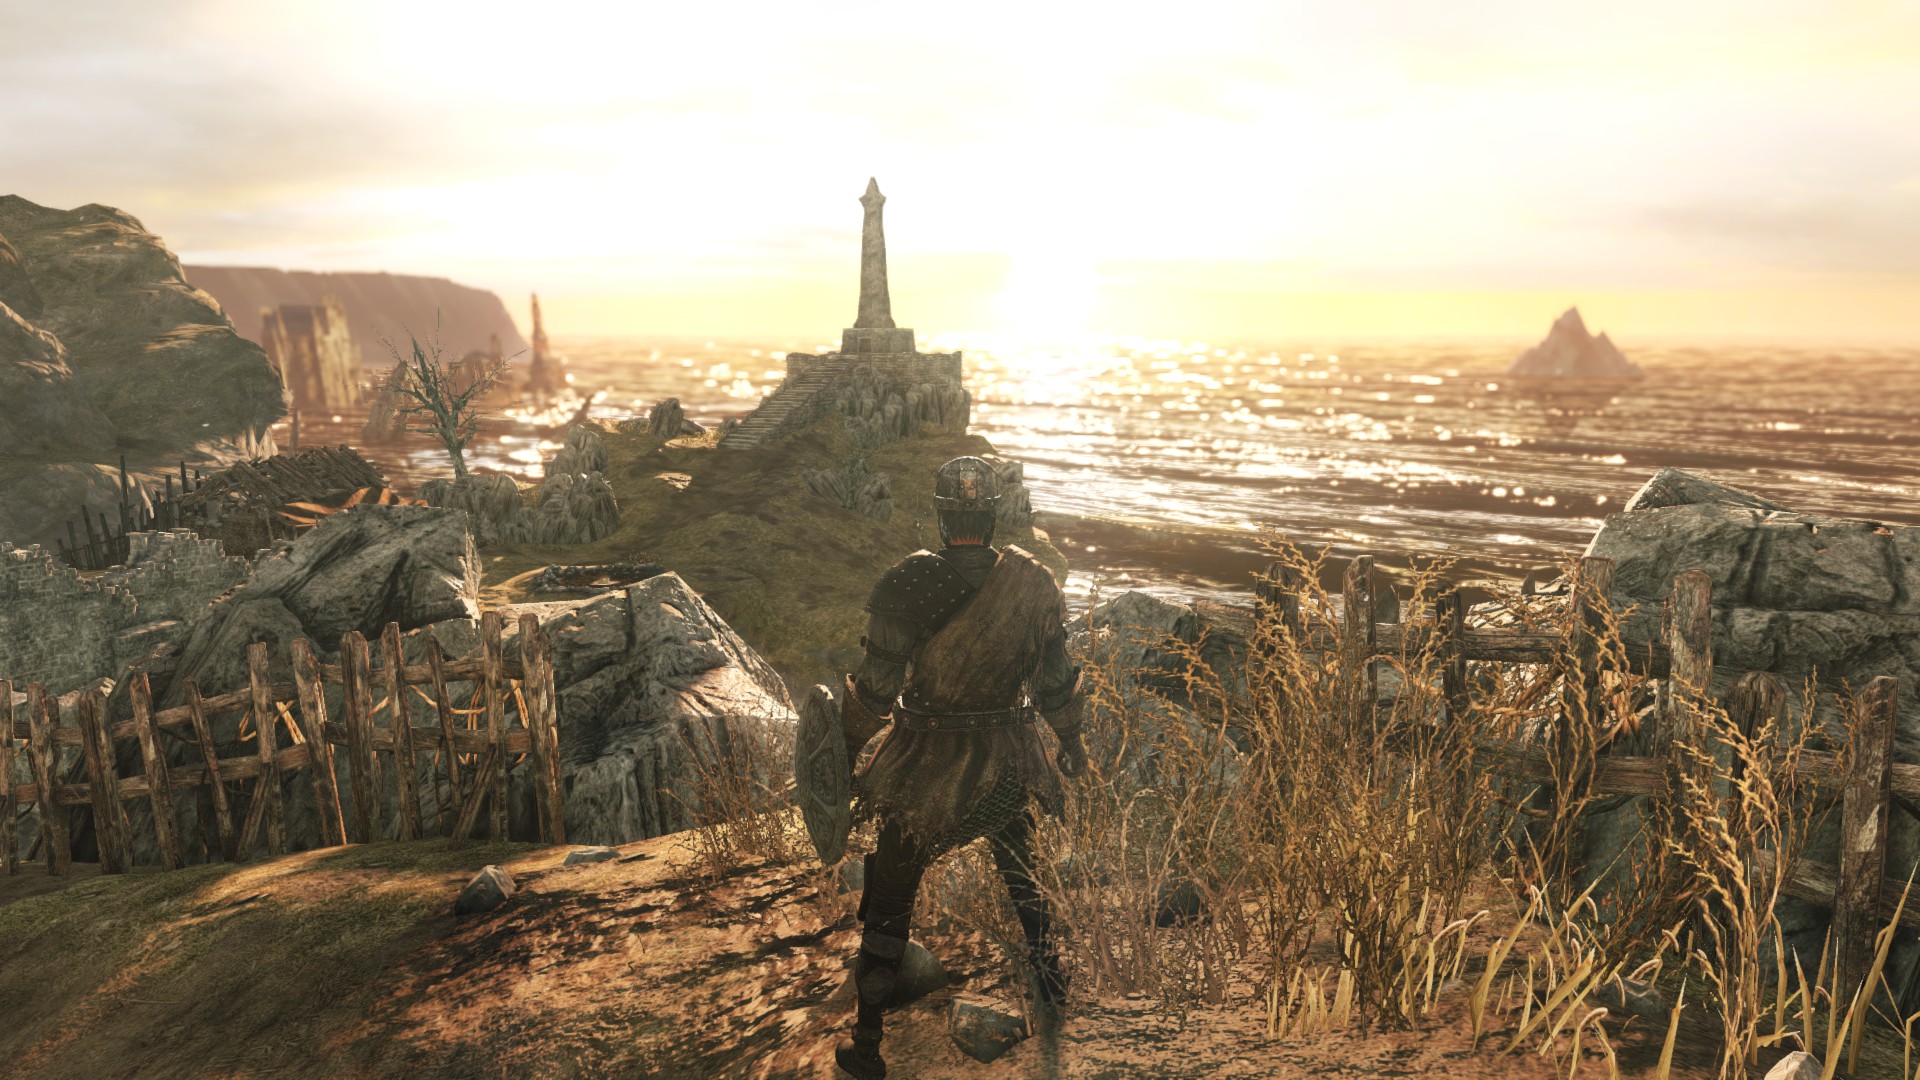 A warrior faces into the setting sun on a fenced cliff side. In the distance a tower on a promontory is silhouetted. Glistening waves roll in from the sea.